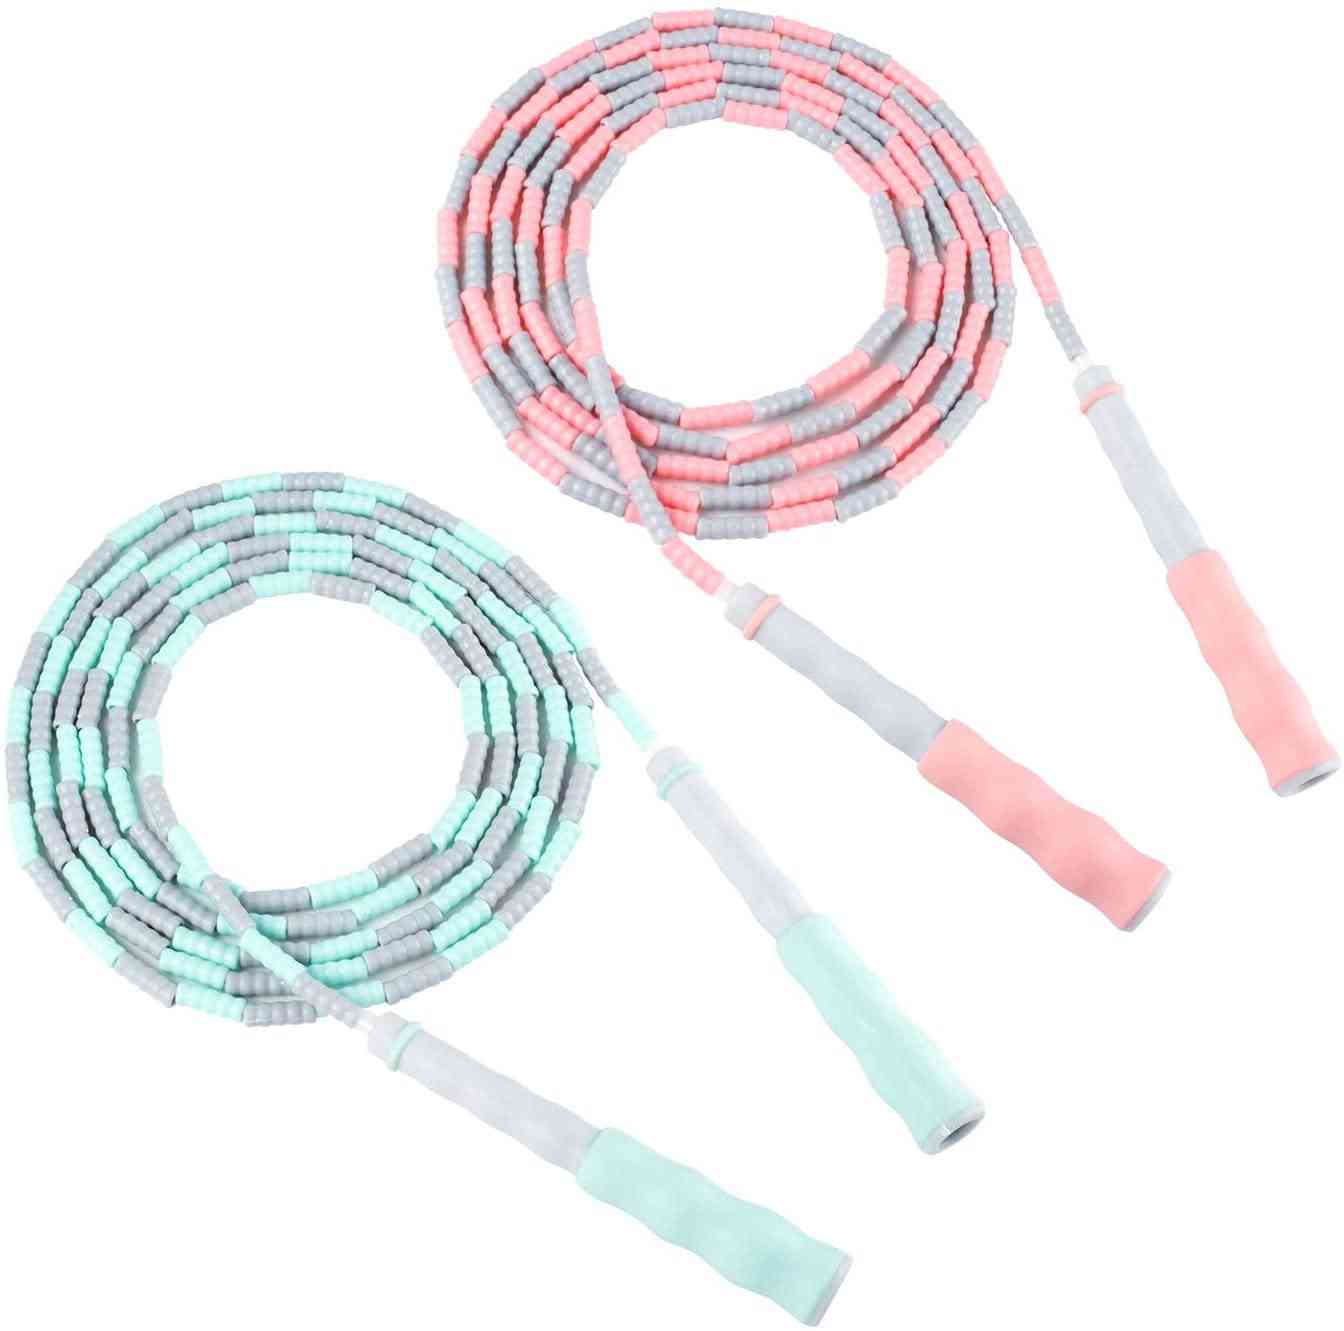 Soft Beaded Jump Rope Non-slip Handle Adjustable Tangle-free Segmented Fitness Rope